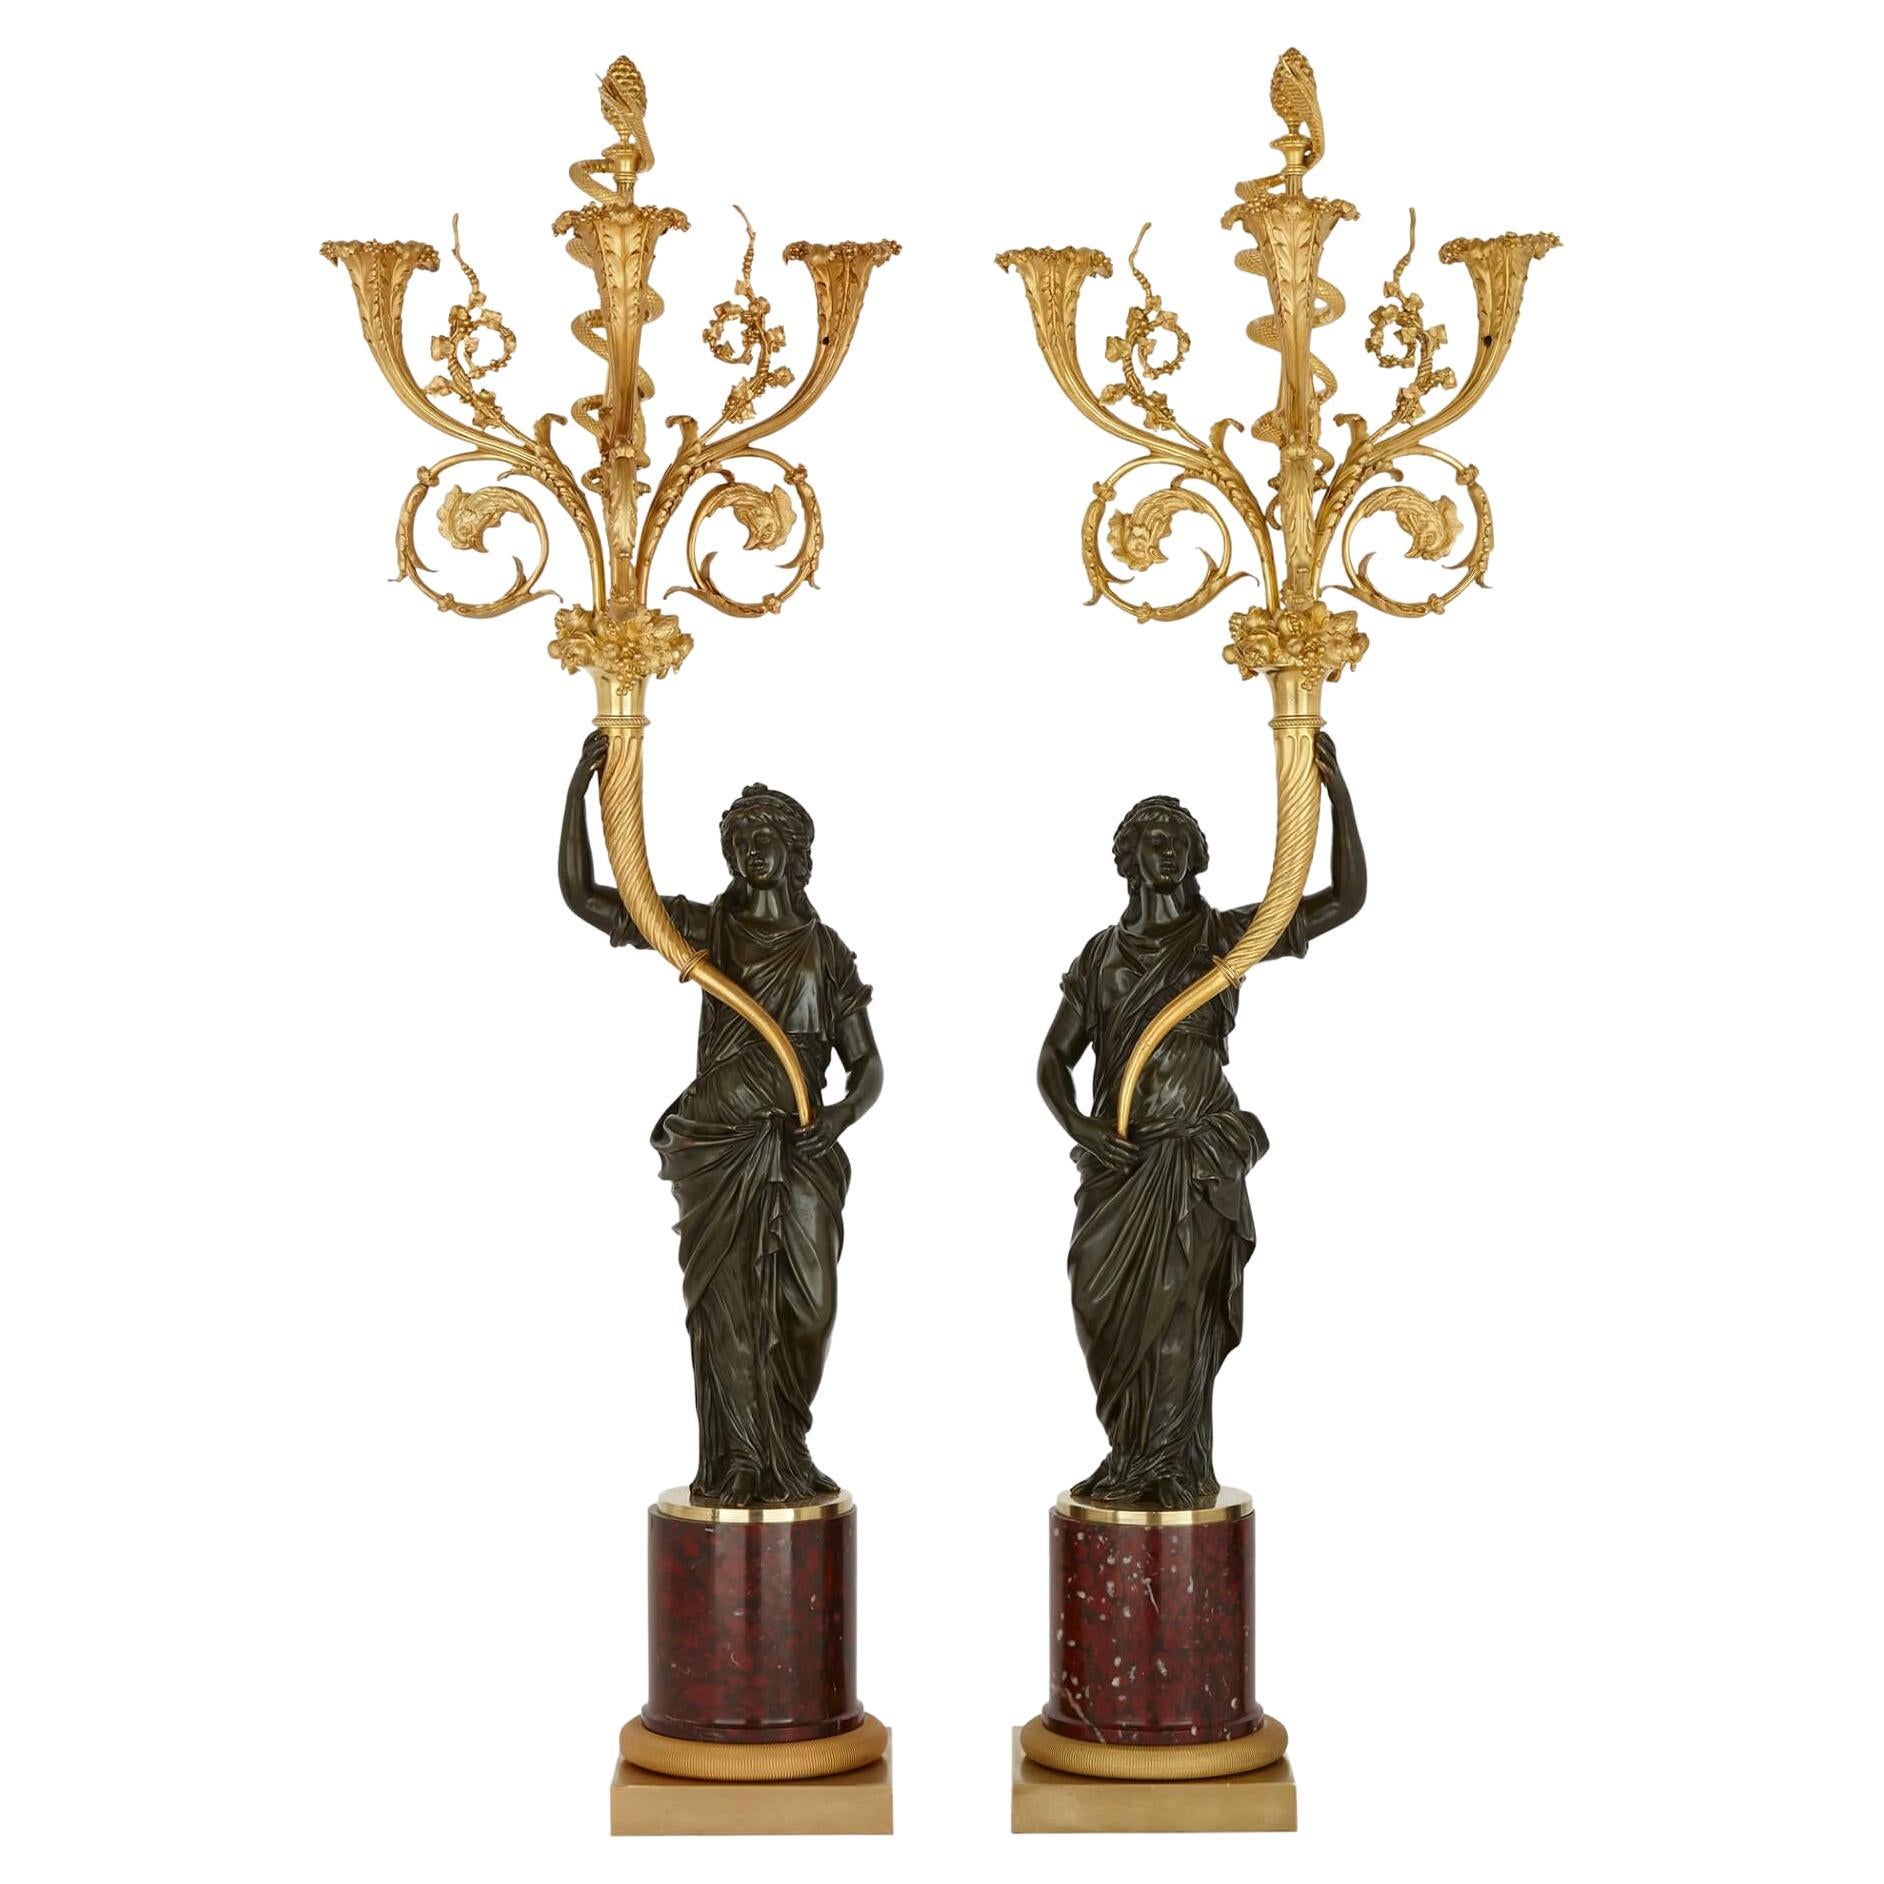 Pair of Large French Bronze and Gilt-Bronze Candelabra